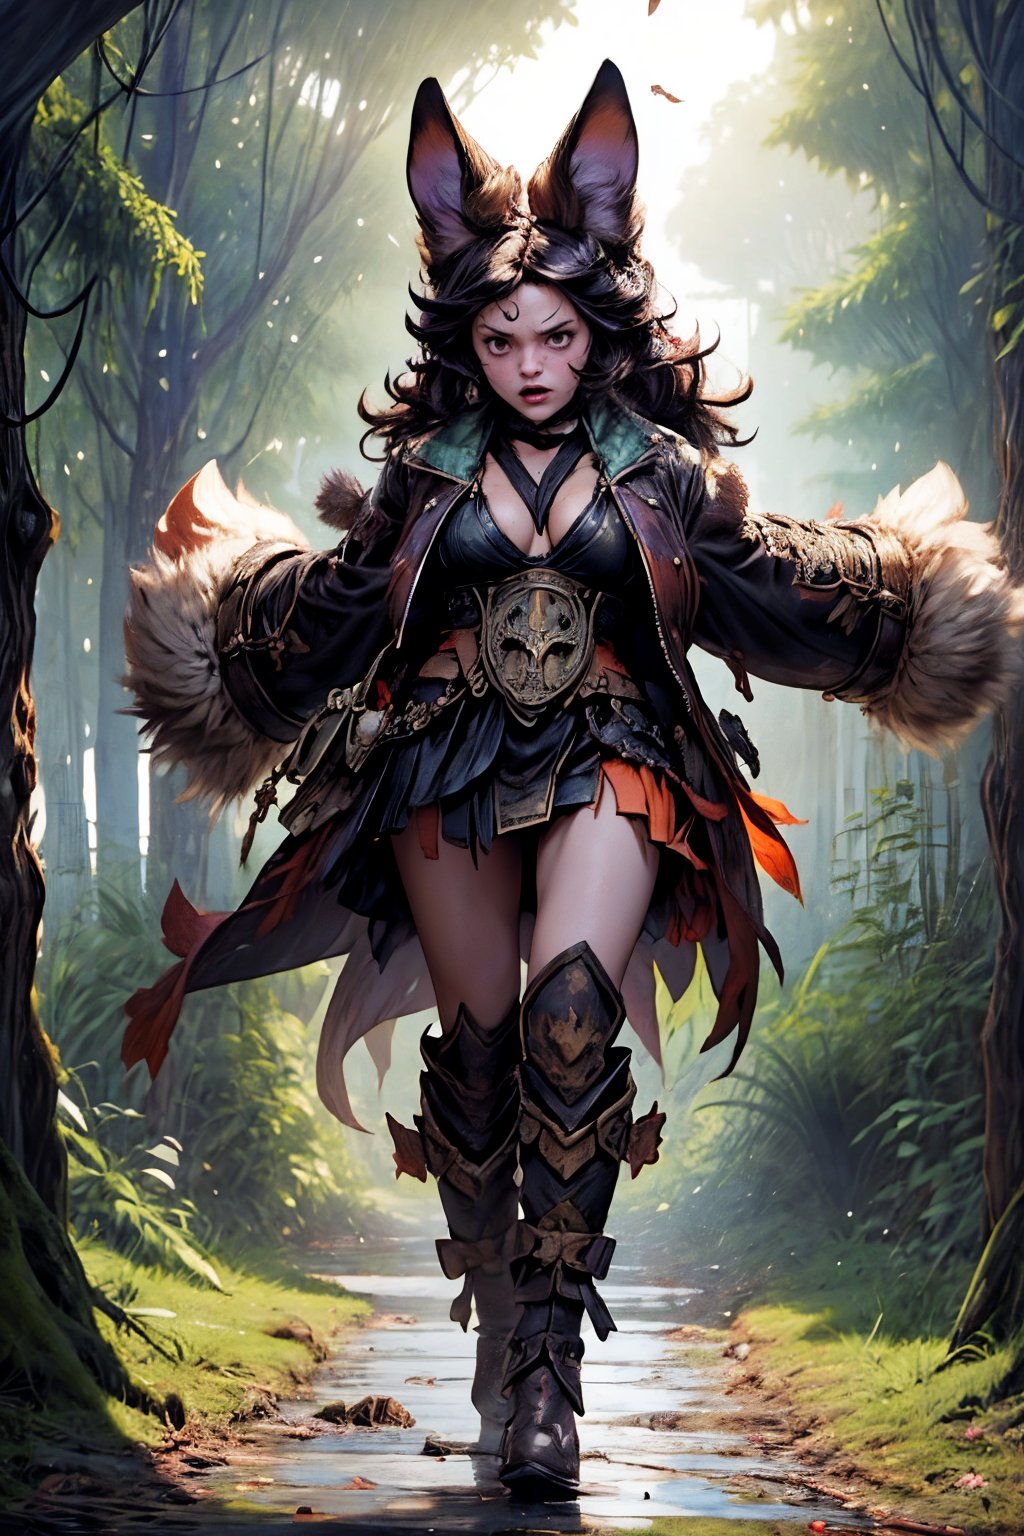 Hyper-detailed painting, Jean-Baptiste Monge style, a gang of cute ninja persian cat Anthropomorphic, steampunk ,, , studded leather jacket with intricate ornamentation orange and purple , pirate steampunk theme,, , highest quality,, very angry face, body fitness, full body, long hair with braids , in the forest,SMMars,Animal ear,vane /(granblue fantasy/)